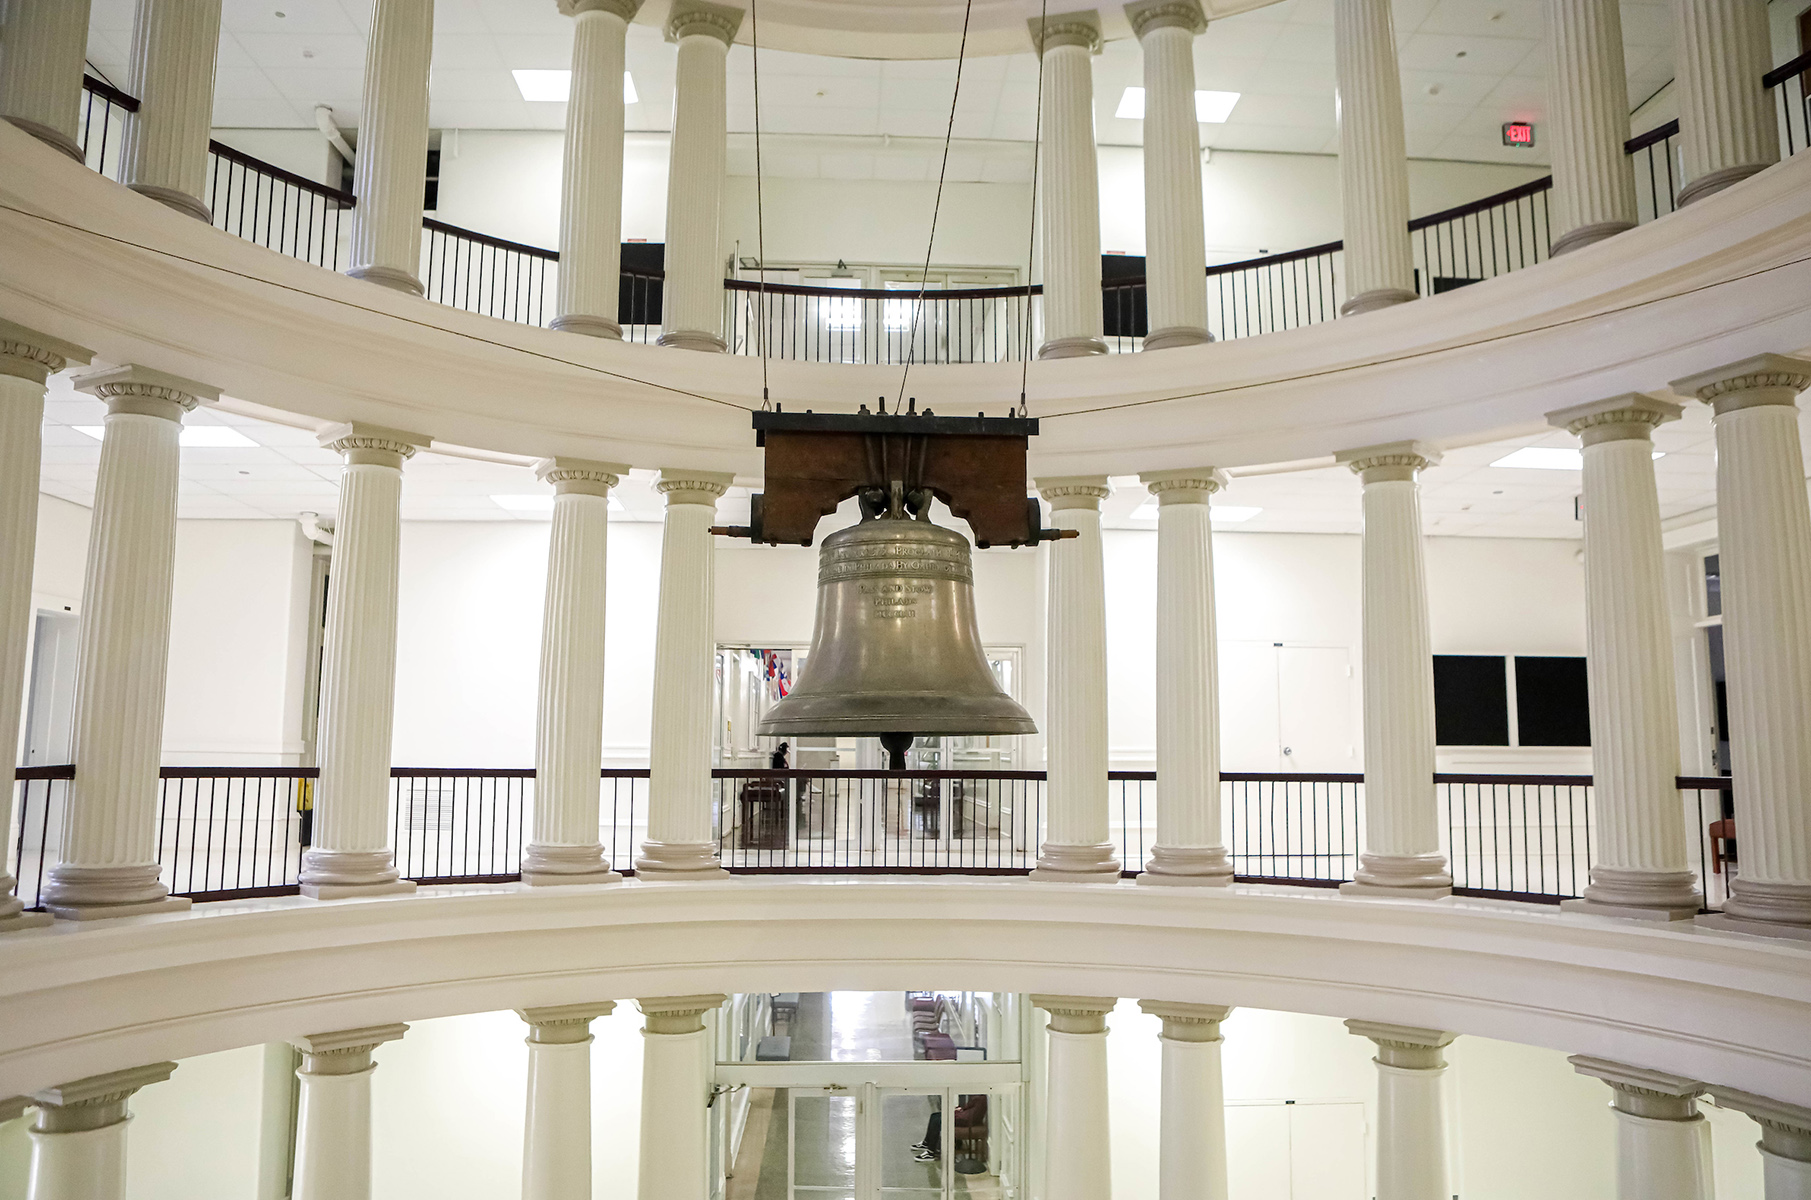 The Texas Liberty Bell suspended in the Academic Building